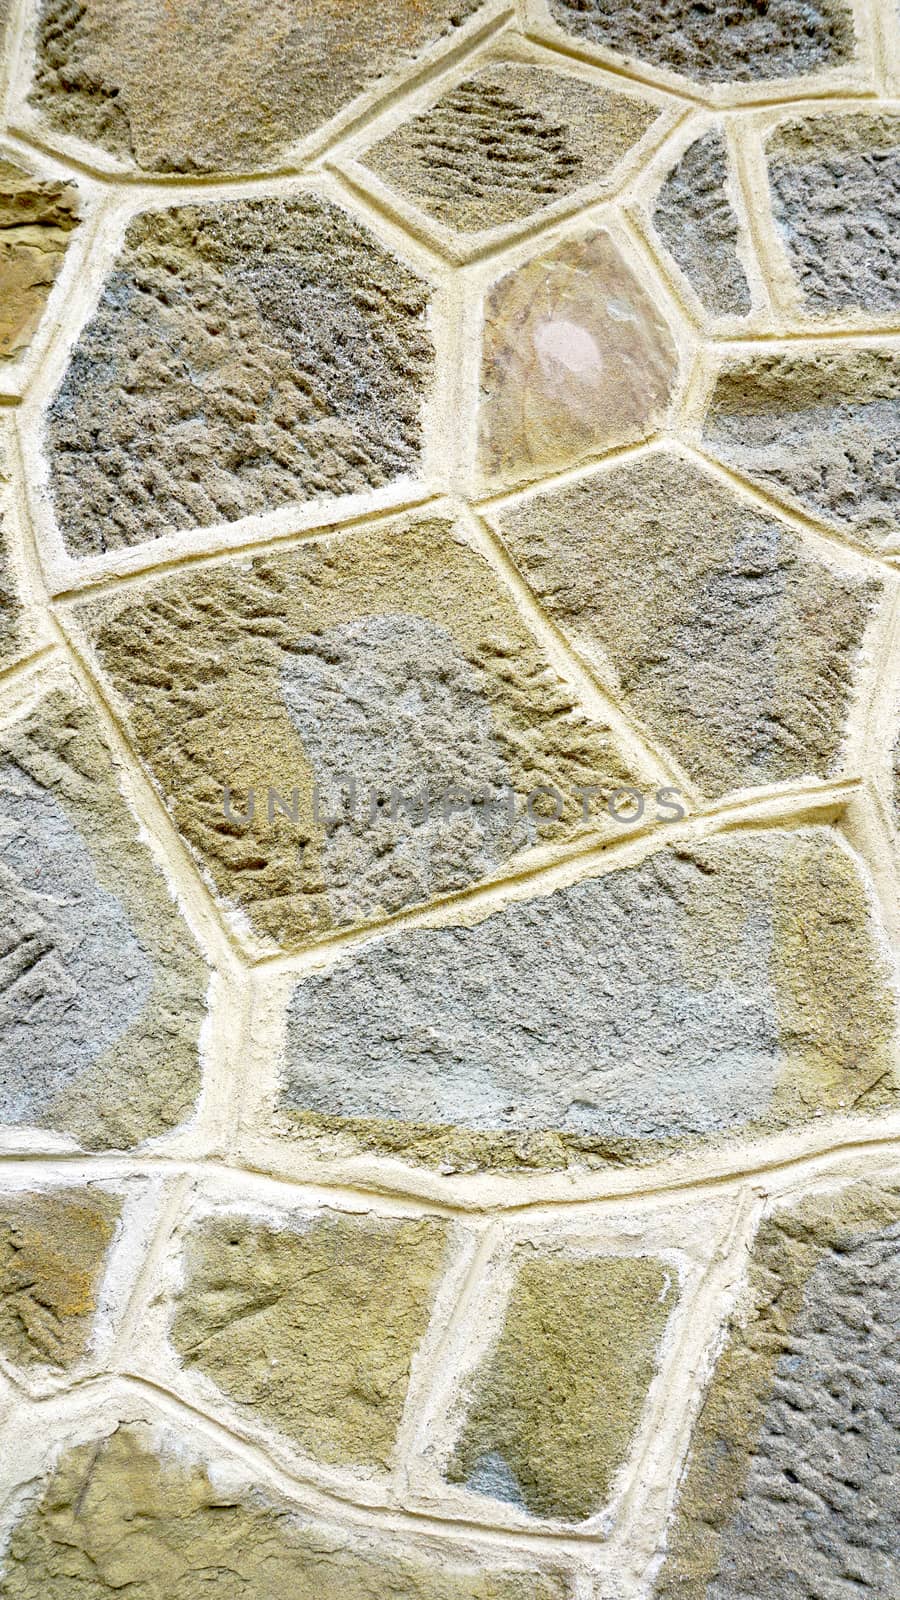 rough wall stone texture close up vertical